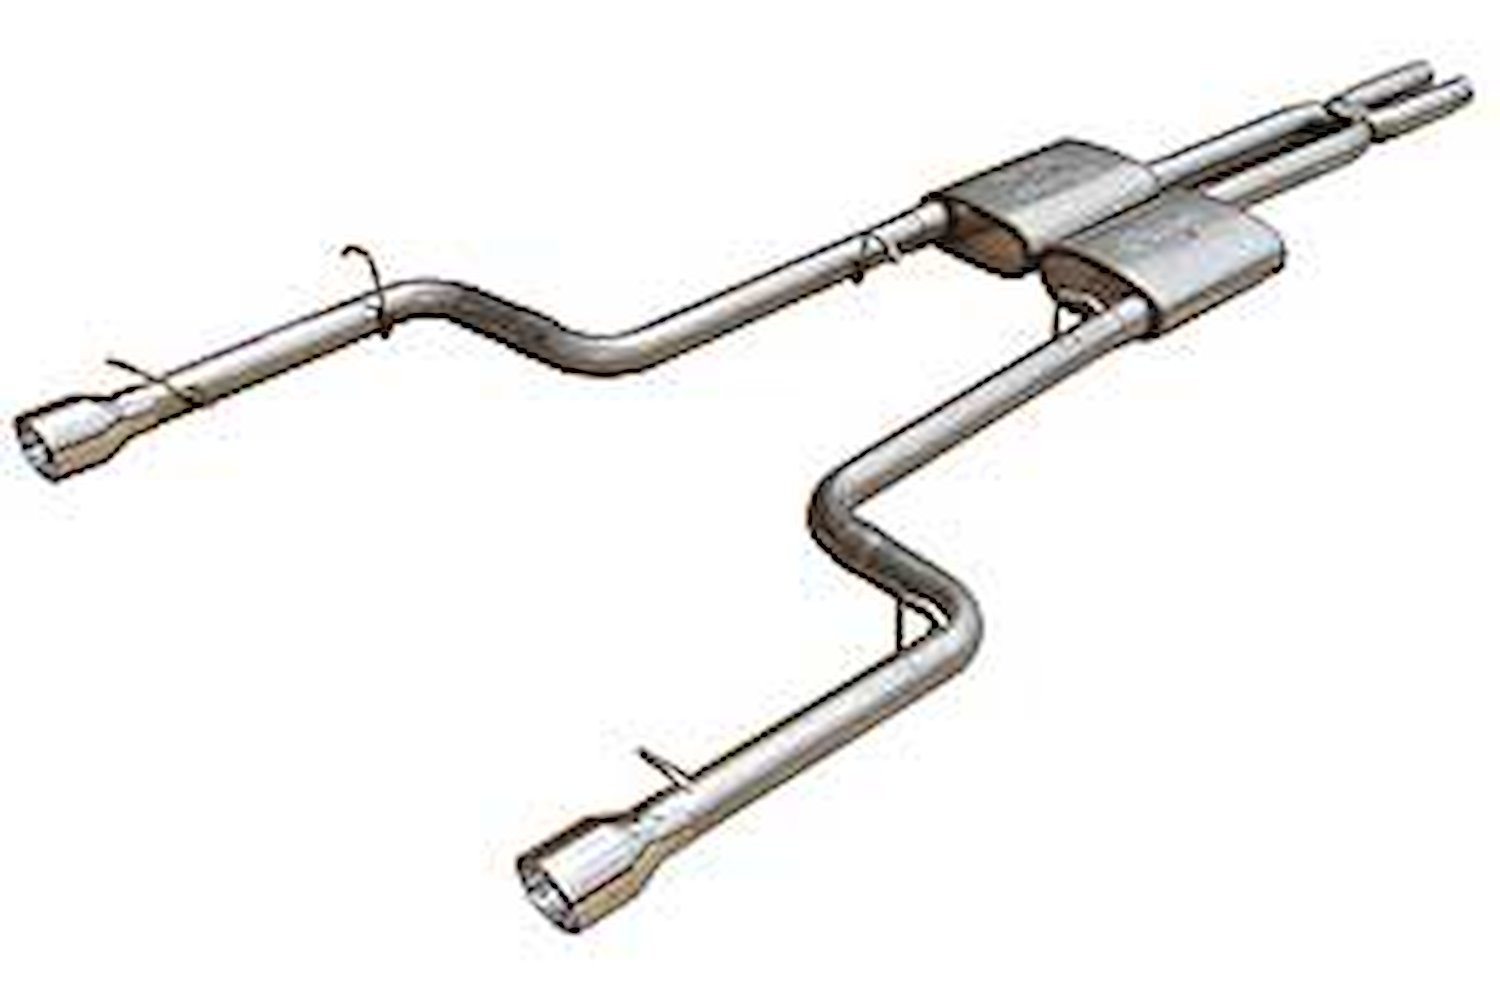 Street-Pro Cat-Back Exhaust System 2005-09 Charger SRT-8